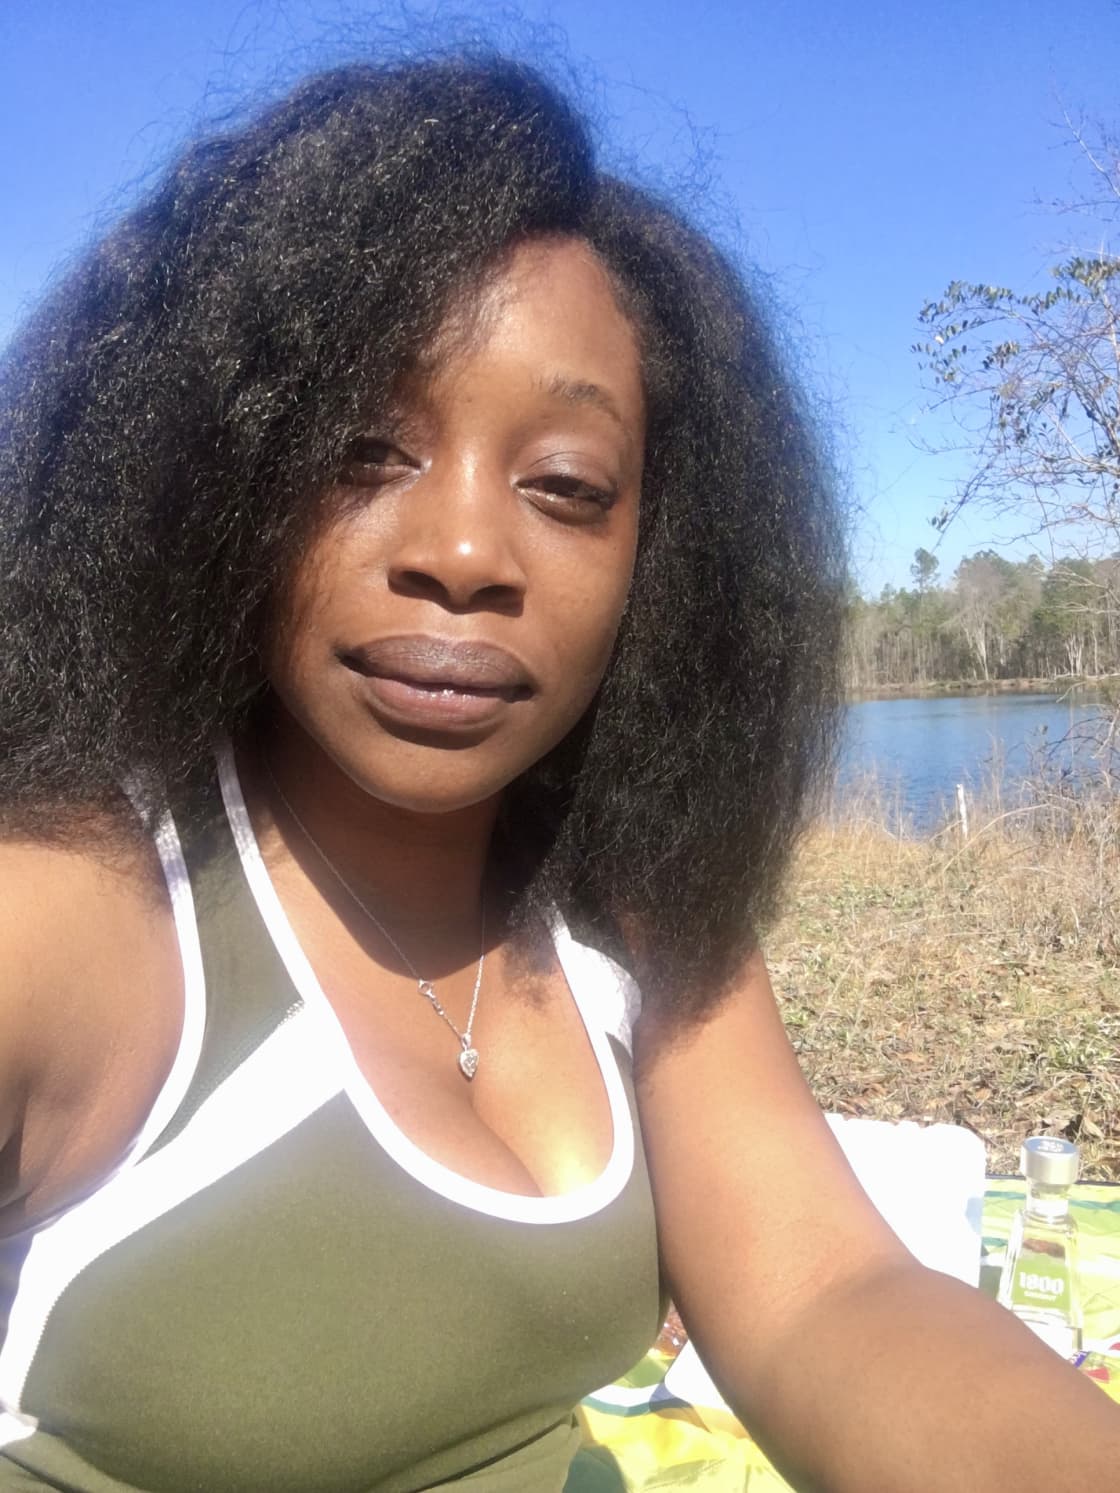 It’s Me Shanel, your host here at CampShanel’s Island Getaway in Lumberton; Enjoying a peaceful day of self connecting! Beautiful isn’t it! So What are you waiting for? Book your stay! you’ll love it here.